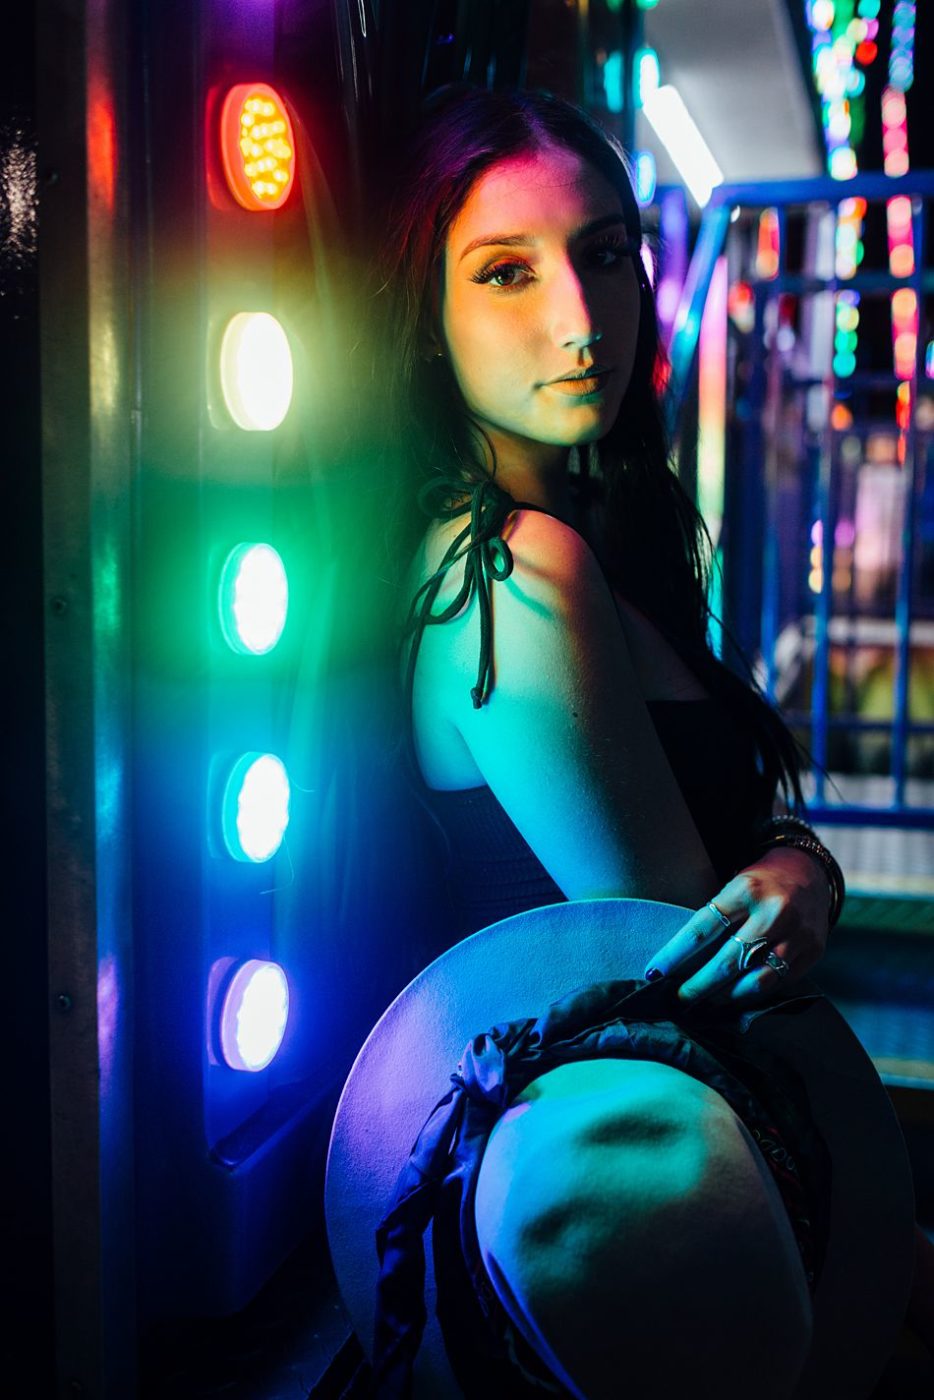 Pretty young woman half-illuminated by the bright lights of a carnival ride with the other half of her face in the dark side